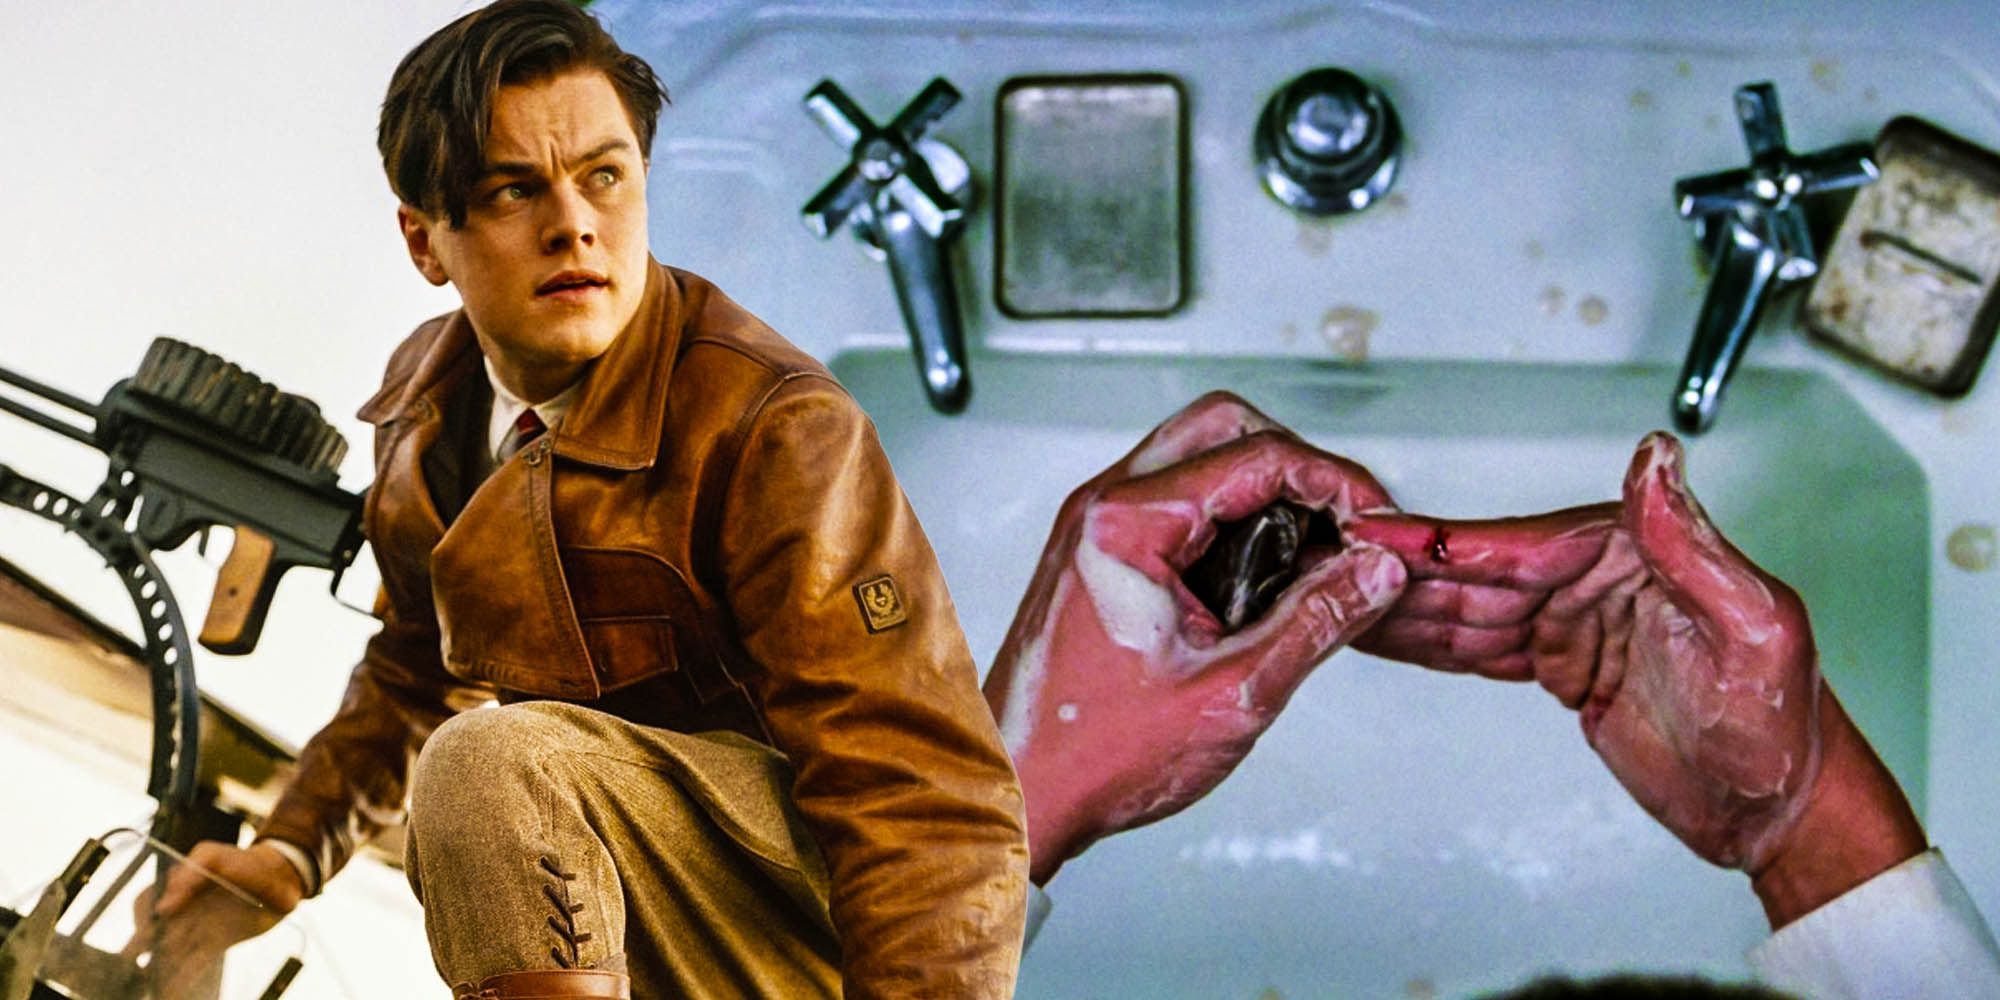 The aviator did Howard Hughes Really Wash His Hands That Much